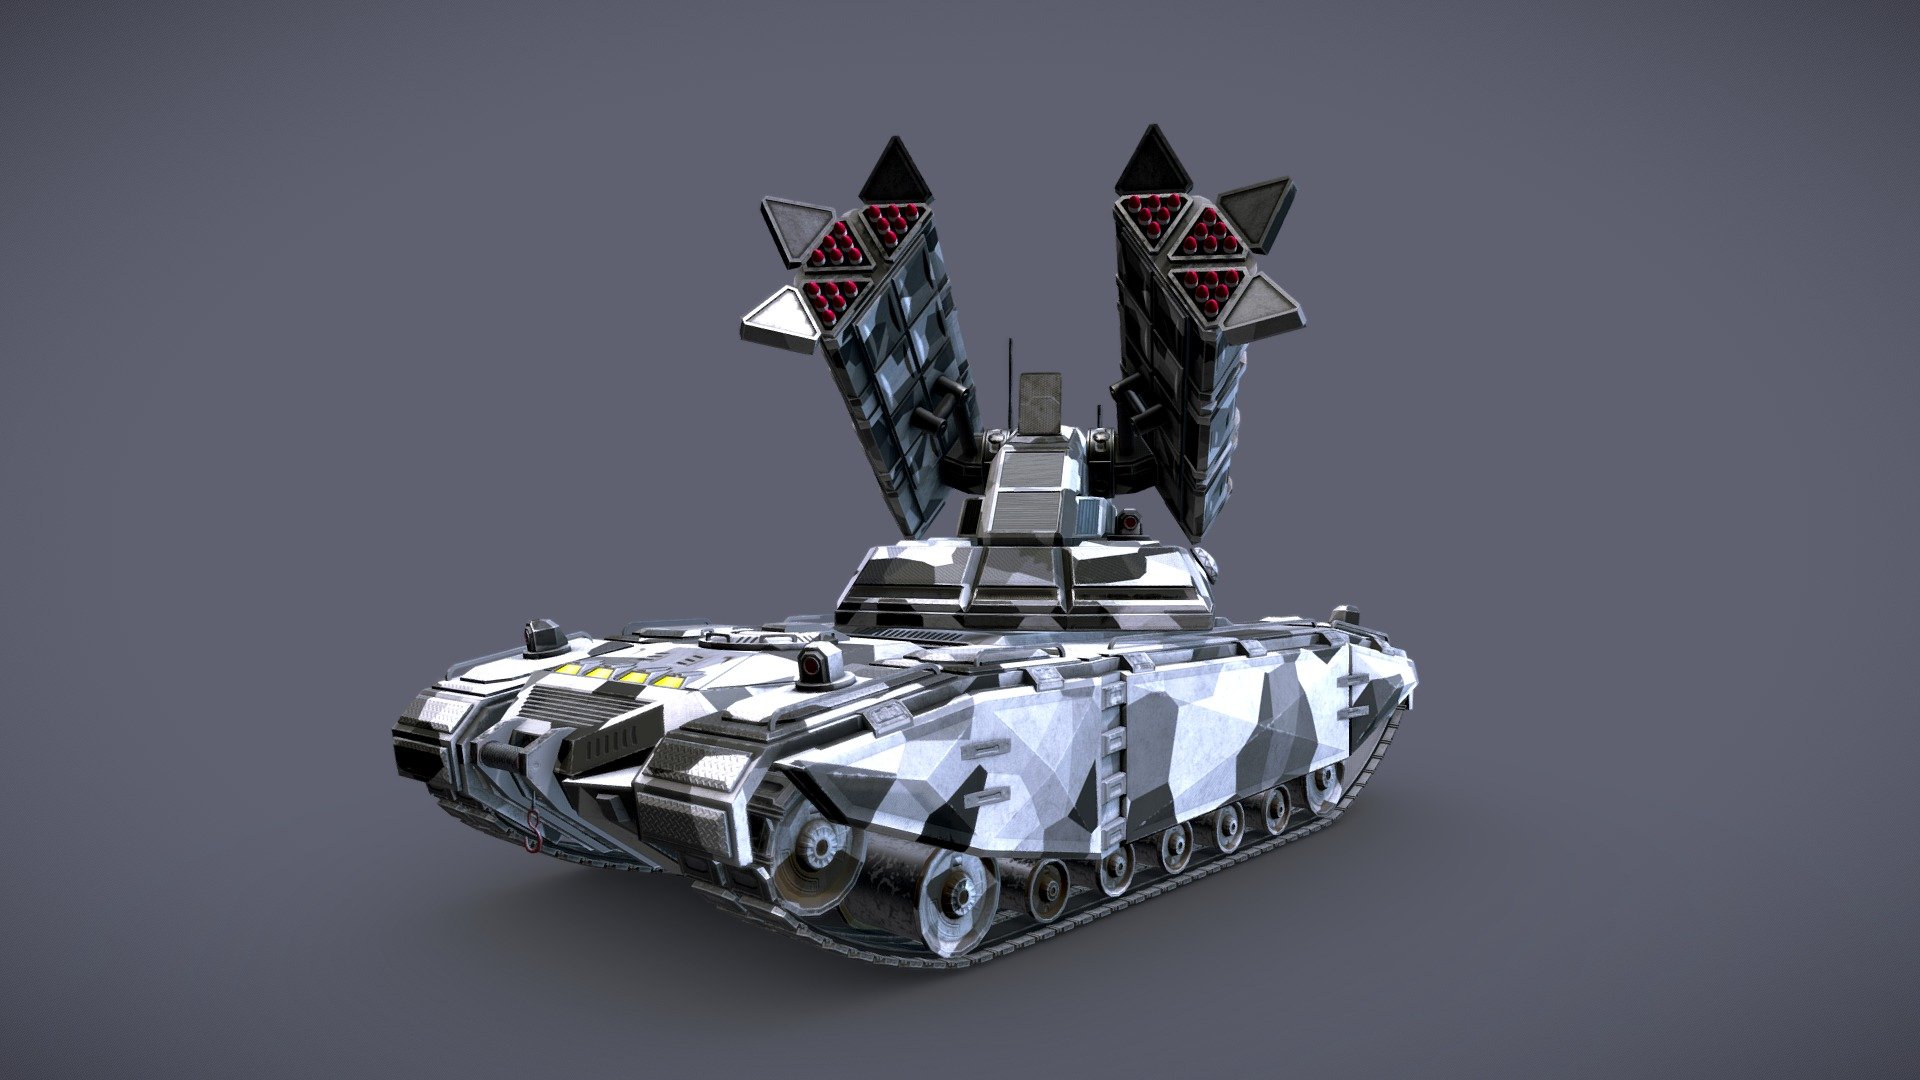 Sci-Fi Missile launcher Tank




Low poly count for video game use.

All Textures created in Substance Painter and exported in .PNG PBR formats.

Includes textures for rough/met and gloss/spec workflows.

Logically named objects, materials and textures.

Modelled in Blender 2.90.1

Textured in Substance Painter 2020.2.1.

Rendered in Marmoset Toolbag 3.

modelled to real world scales (Metric).

Fully and efficiently UV unwrapped.

Game ready.

Tested in Marmoset Viewer, Marmoset Toolbag, EEVEE and Cycles.

Partially rigged in Blend format for posing as seen in preview.

Formats included




.Blend (Native, with partial rigging)

.FBX

.OBJ

Objects included




Top (Collection)

Missiles


Top




Bottom (Collection)




Base




Tracks (Collection)



Runners


Tracks




Bone Shapes (Collection)




Armature



Poly Counts combined




Face count:       41,566

Vert count:       43,663

Edges:        83,473

Triangulated count:   80,460
 - Sci-Fi Missile launcher Tank - Buy Royalty Free 3D model by PBR3D 3d model